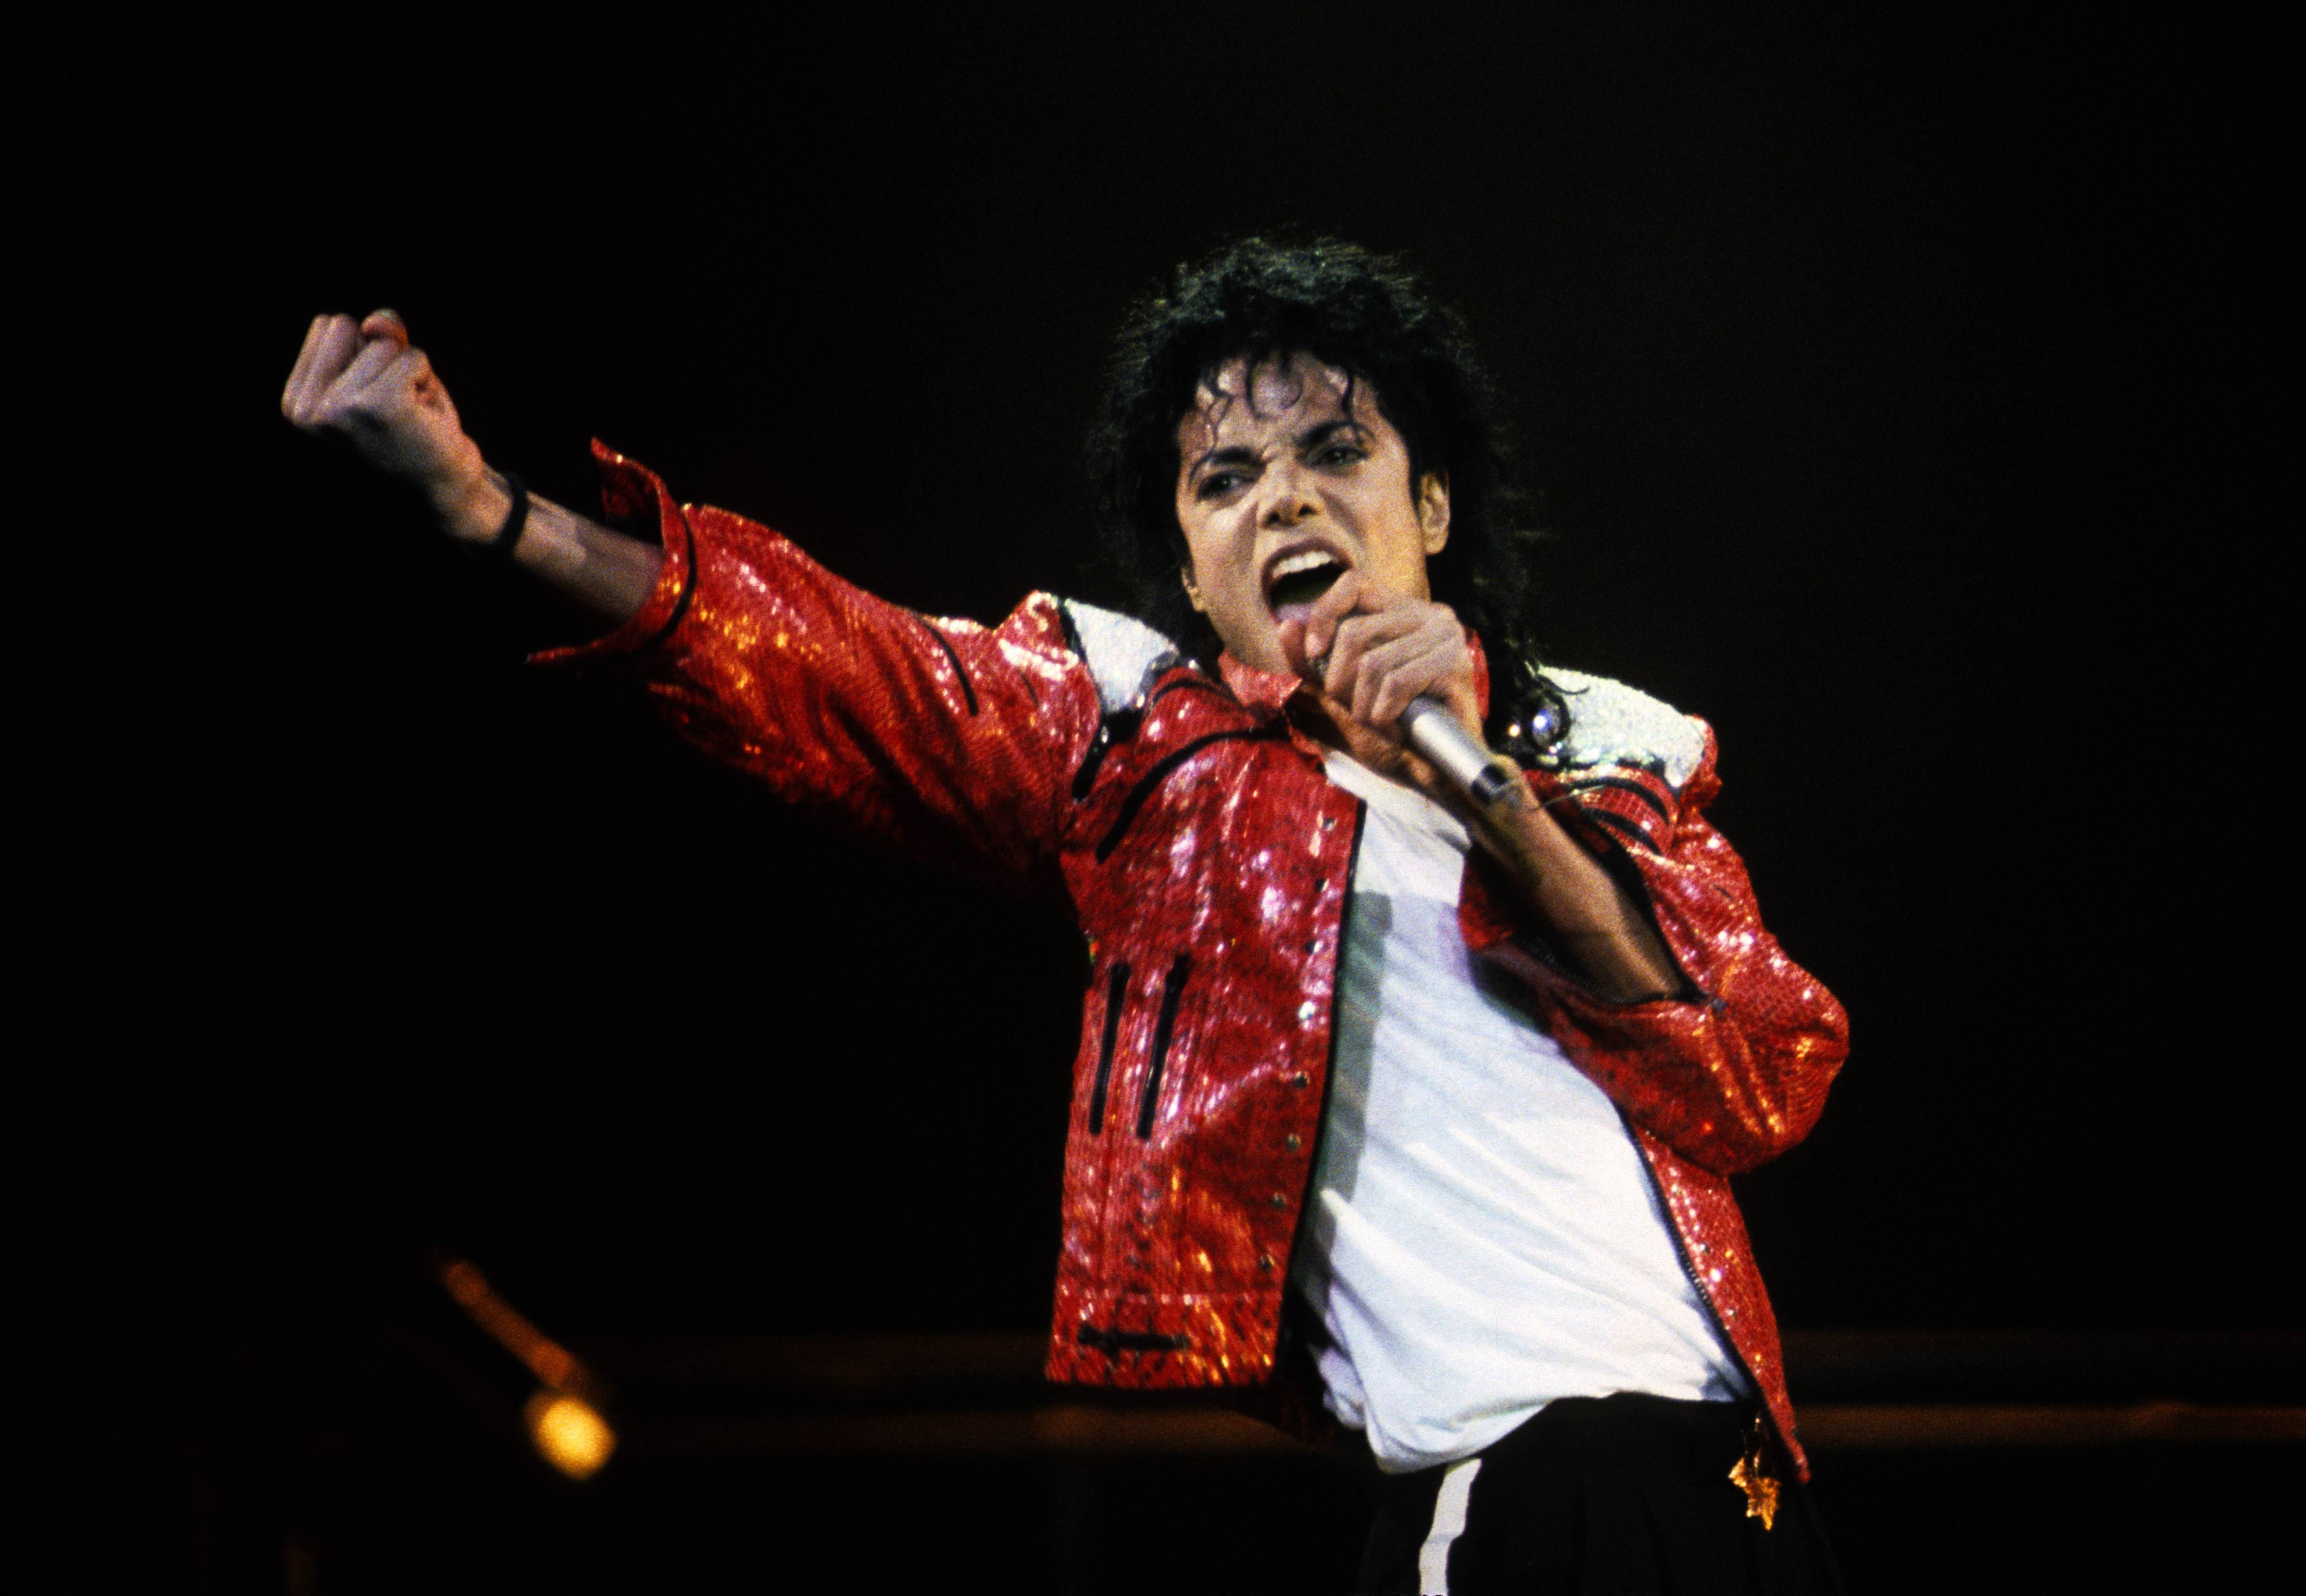 Michael Jackson performing on stage in a red jacket - Michael Jackson